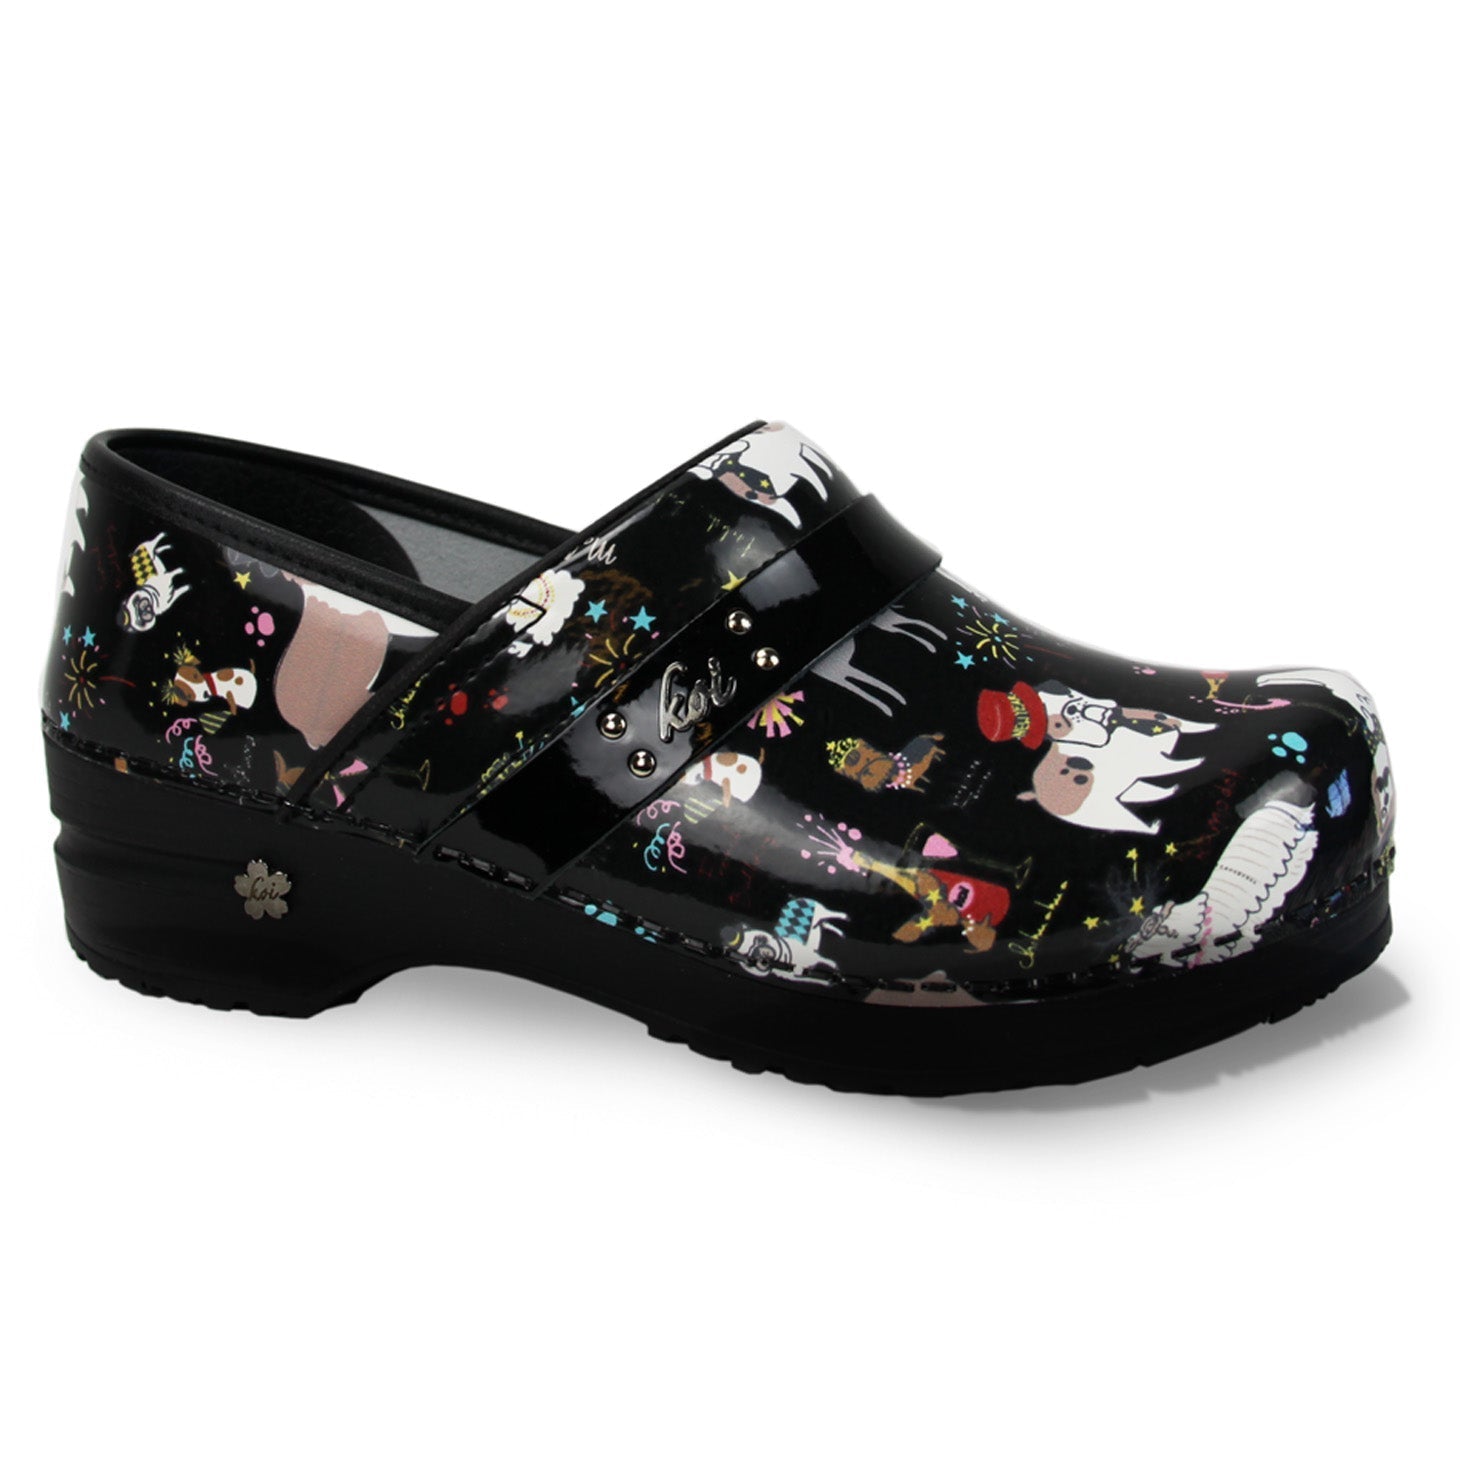 Sanita Fancy Party Women's in Multicolor - Avail Fall '22 Closed Back Clog